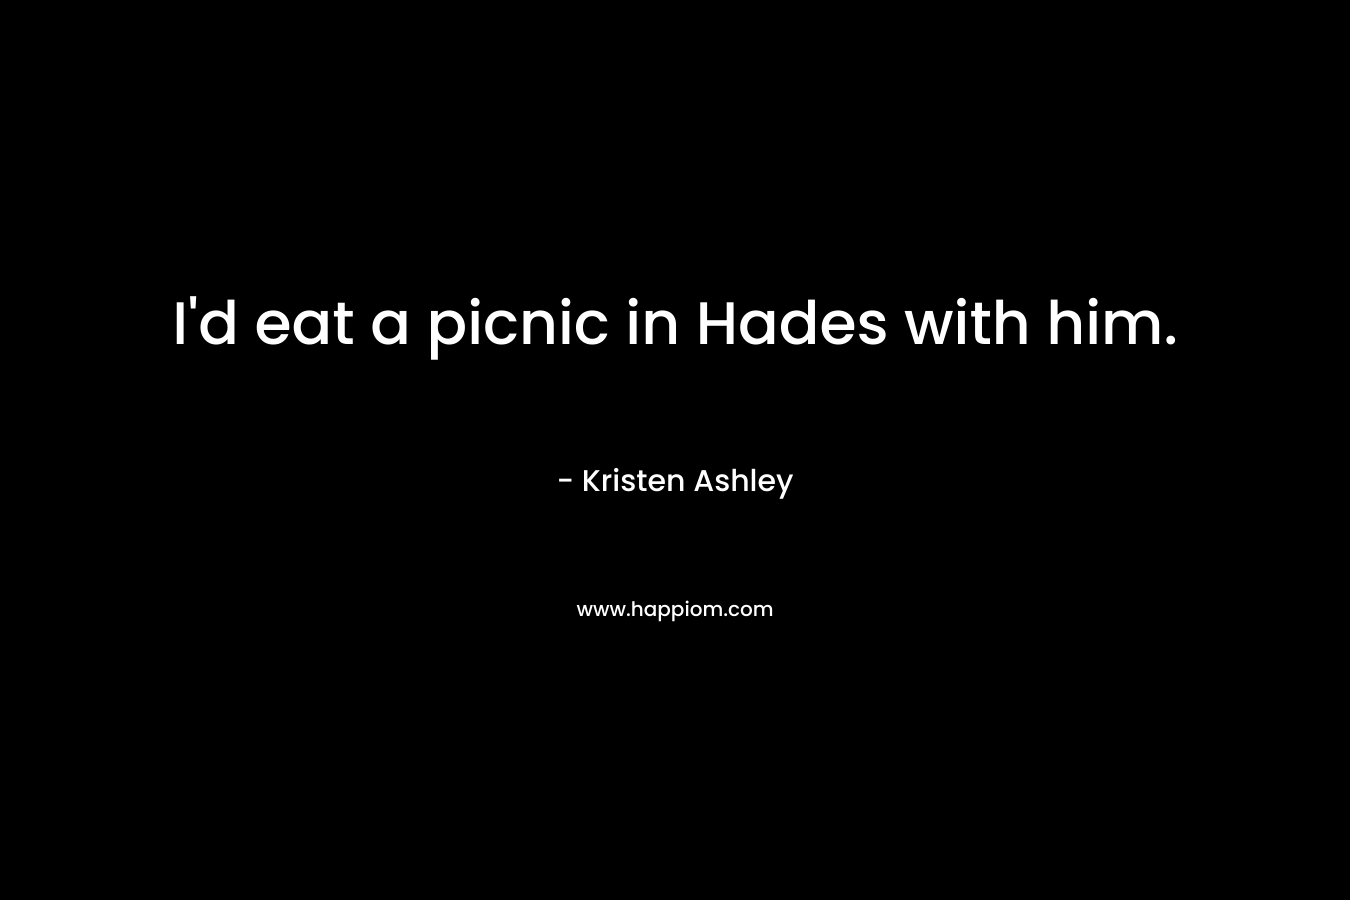 I’d eat a picnic in Hades with him. – Kristen Ashley